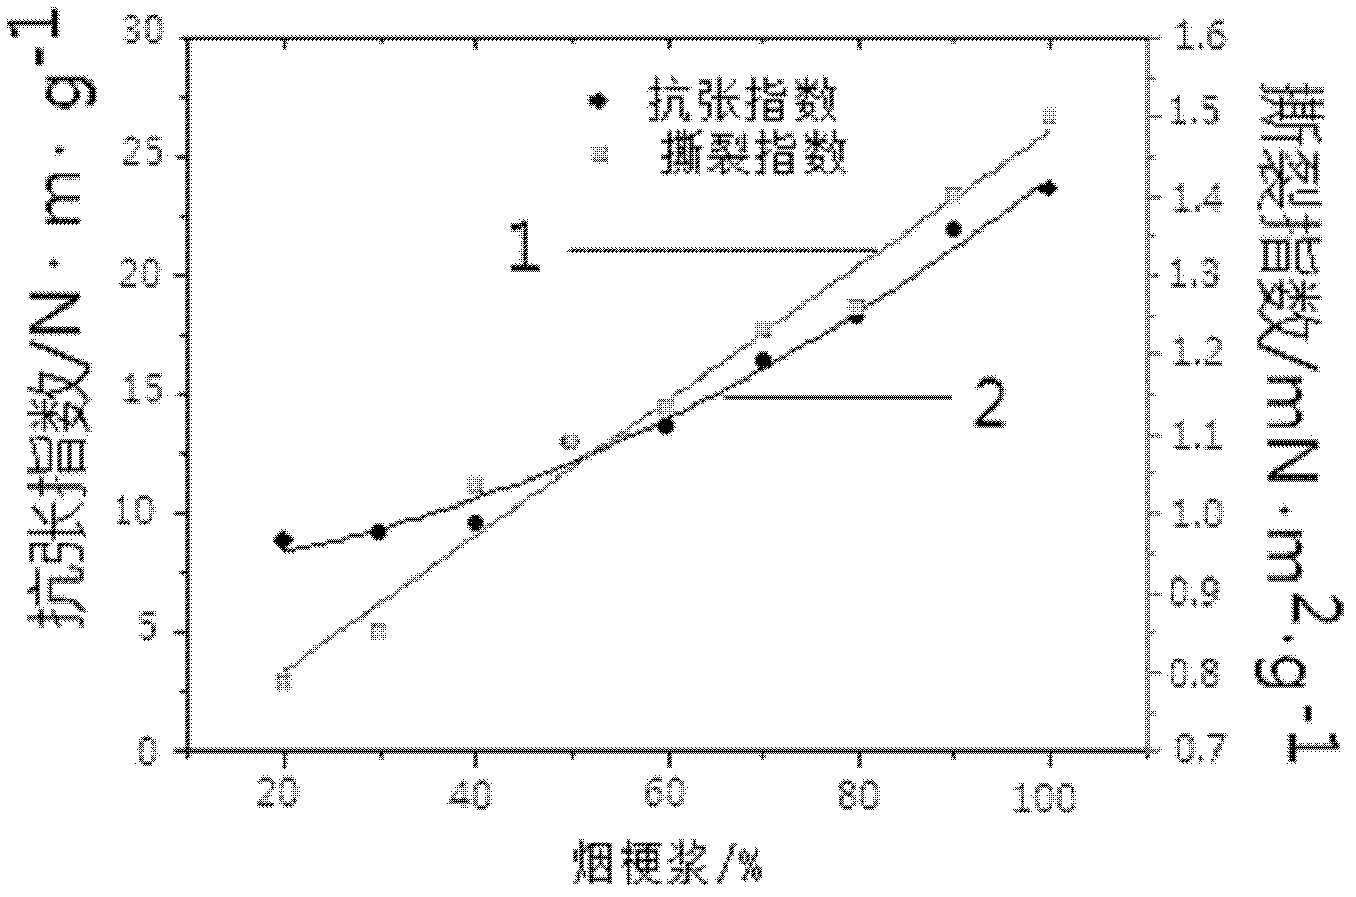 Preparation method of reconstituted tobacco from tobacco stem and tobacco powder